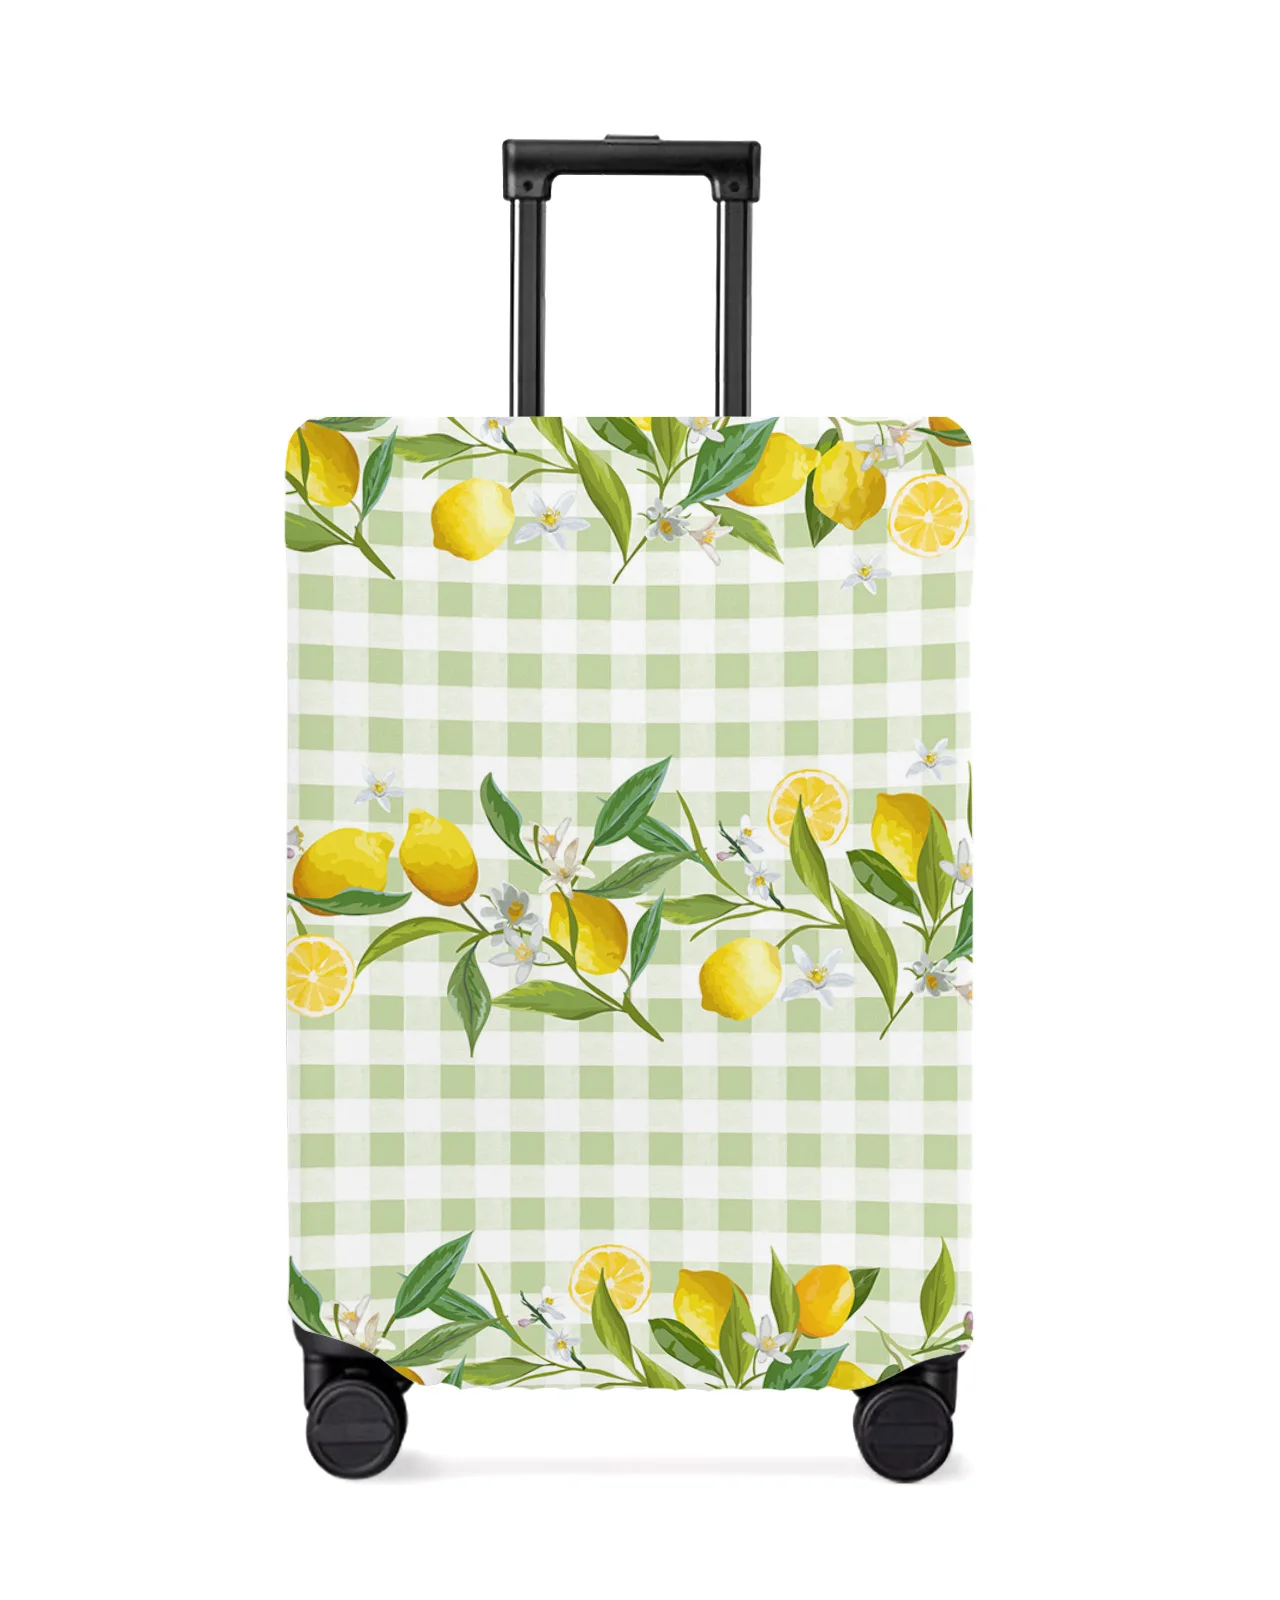 

Lemon Plaid Green Luggage Cover Stretch Suitcase Protector Baggage Dust Case Cover for 18-32 Inch Suitcase Case Travel Organizer